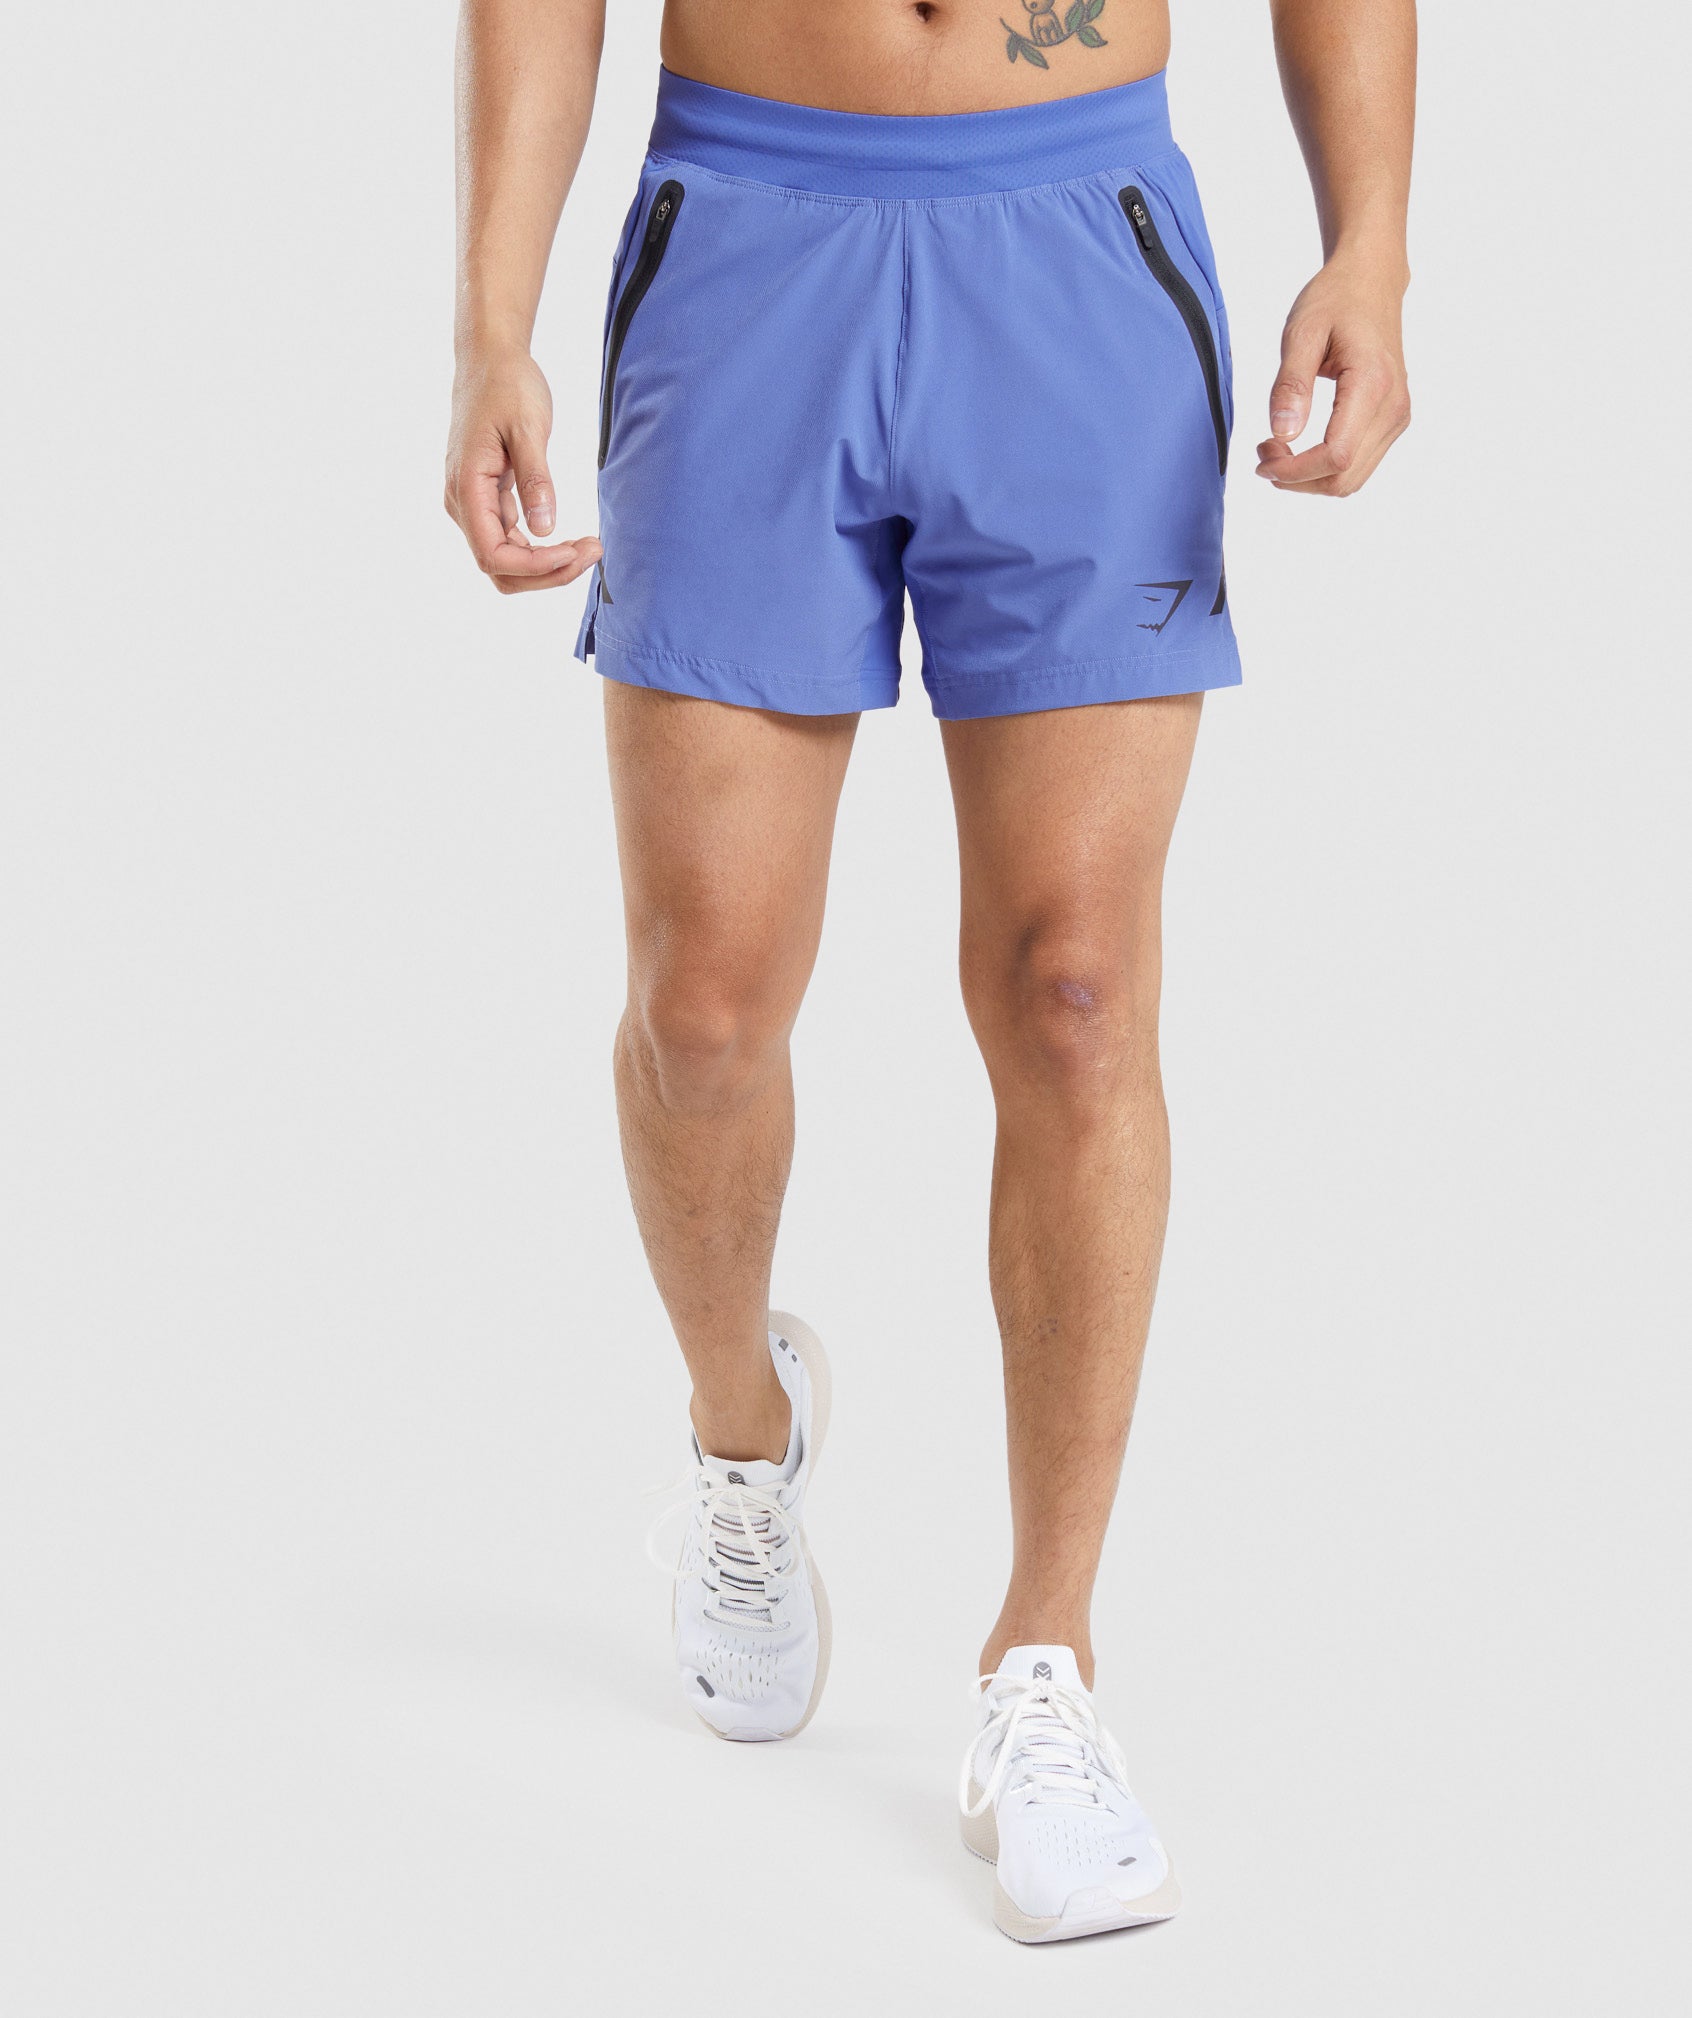 Apex 5" Perform Shorts in Court Blue - view 1